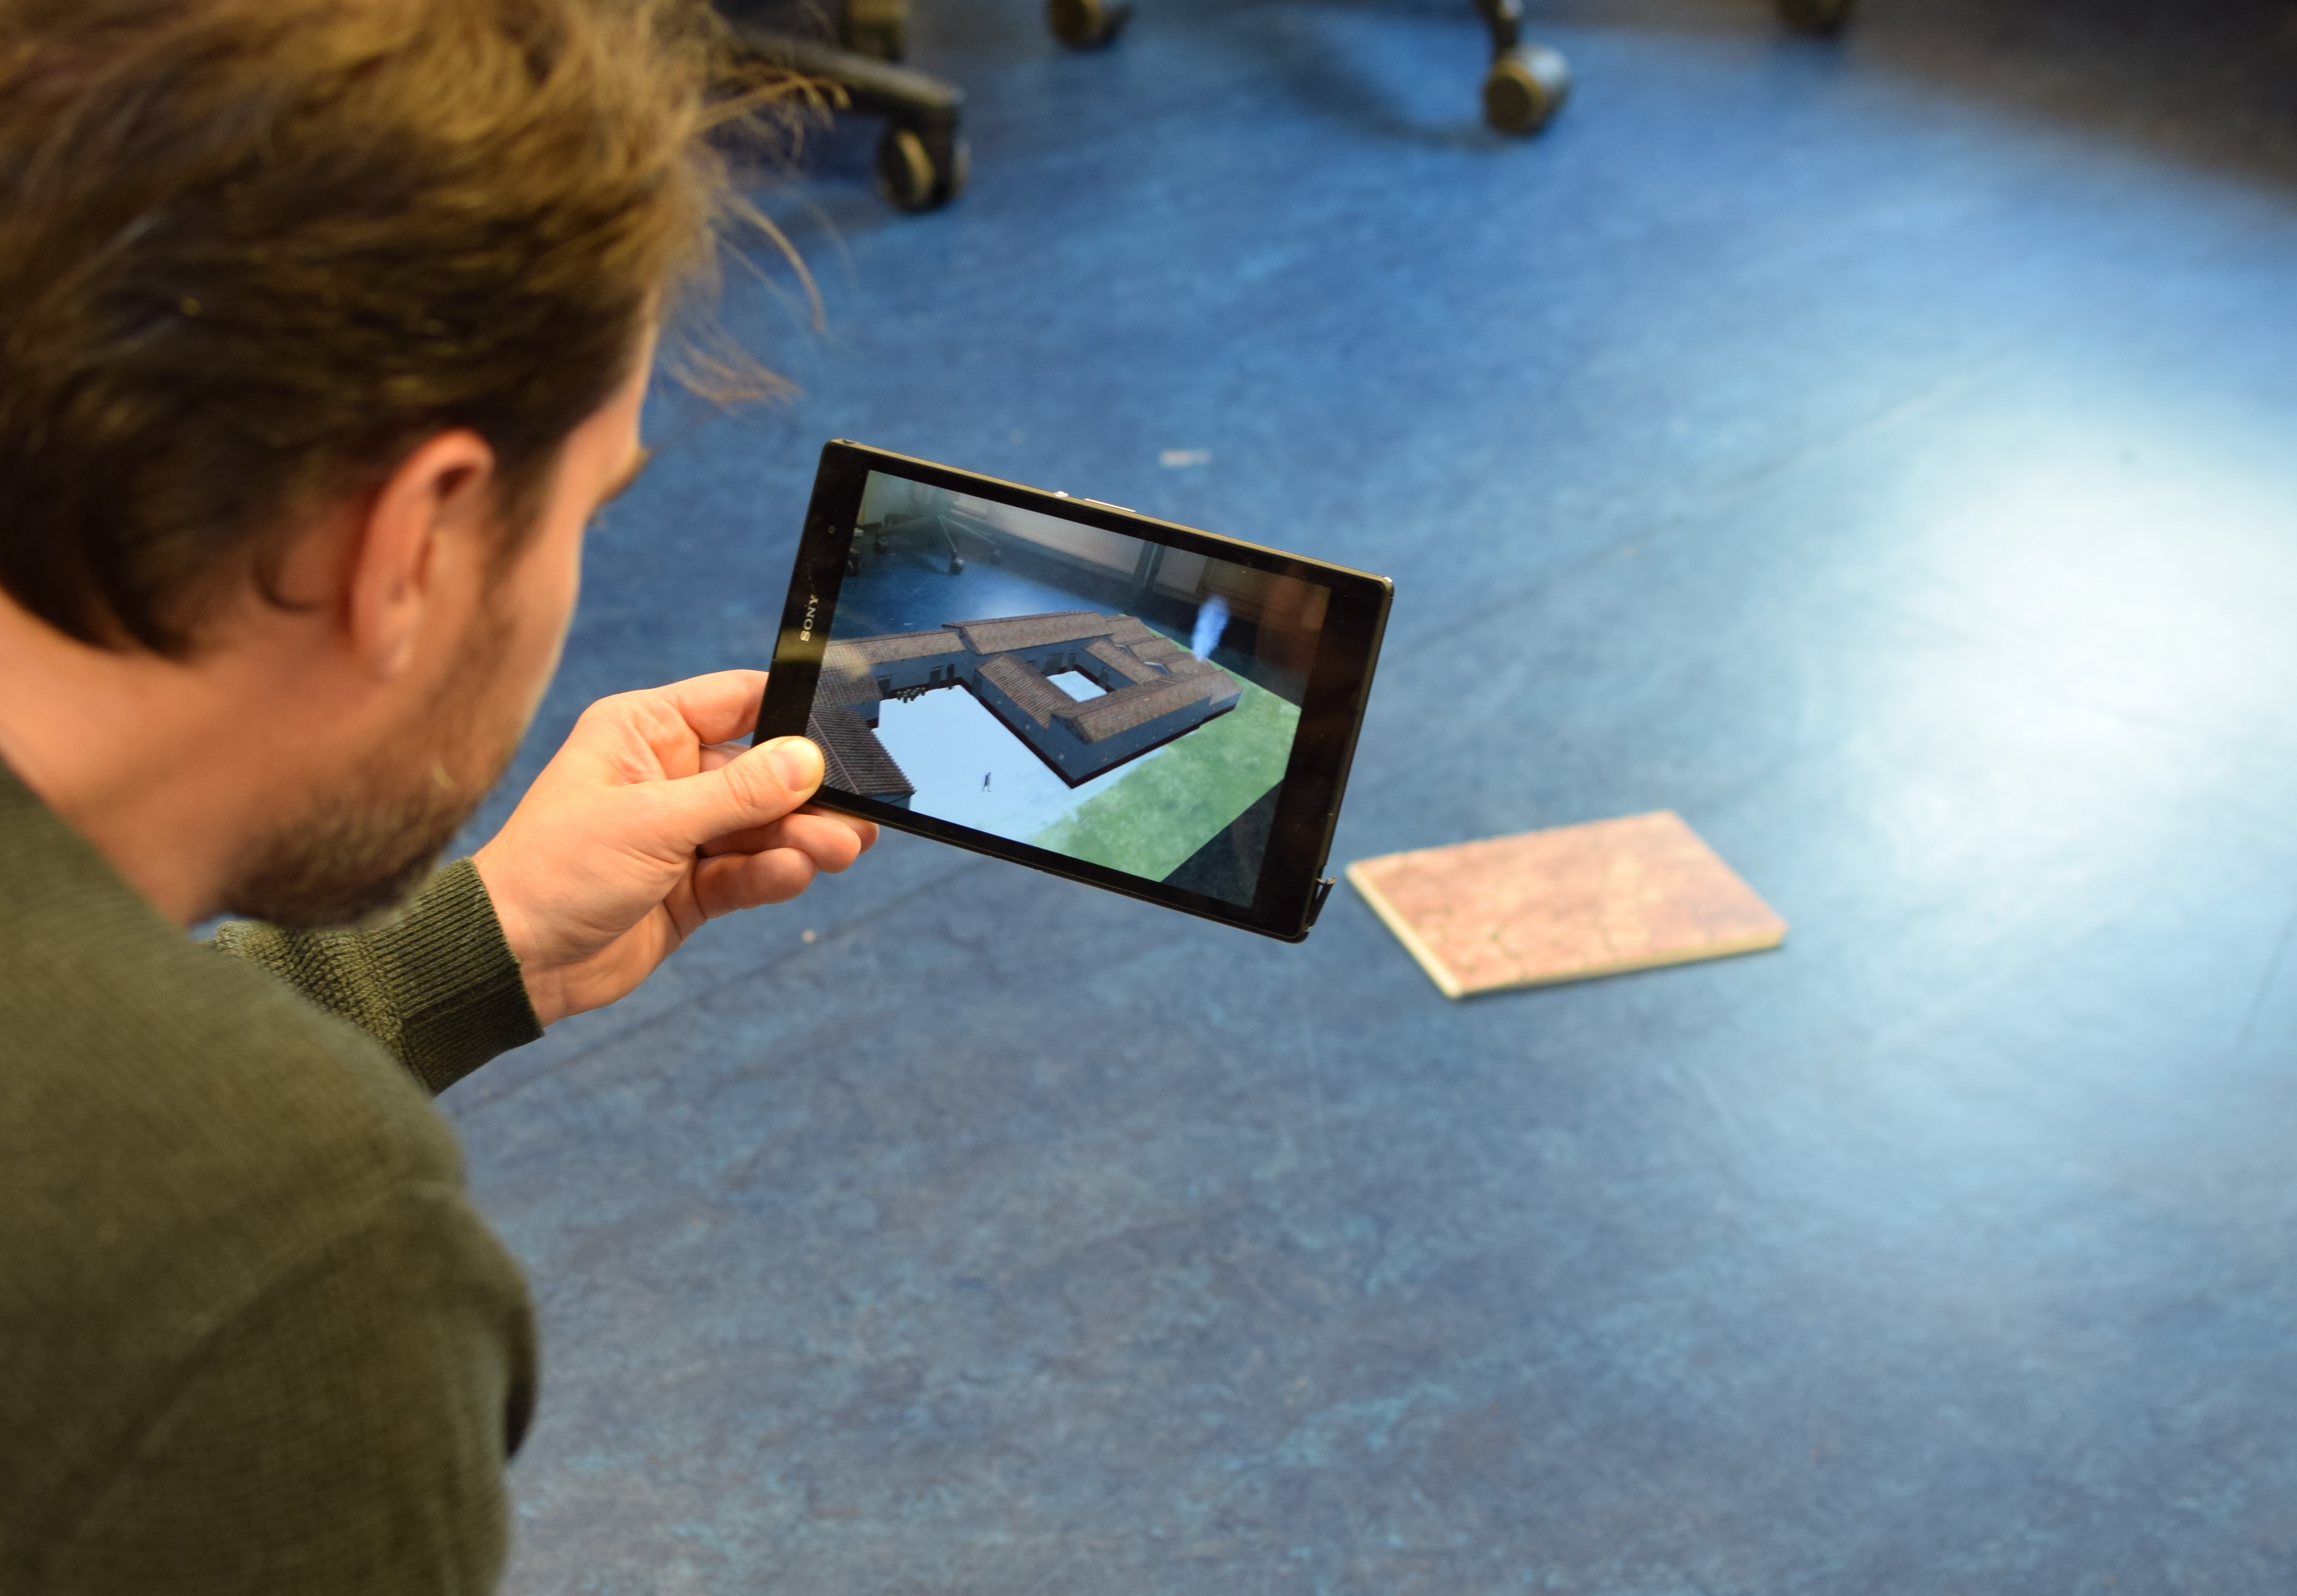 Grant for exploring augmented reality in education